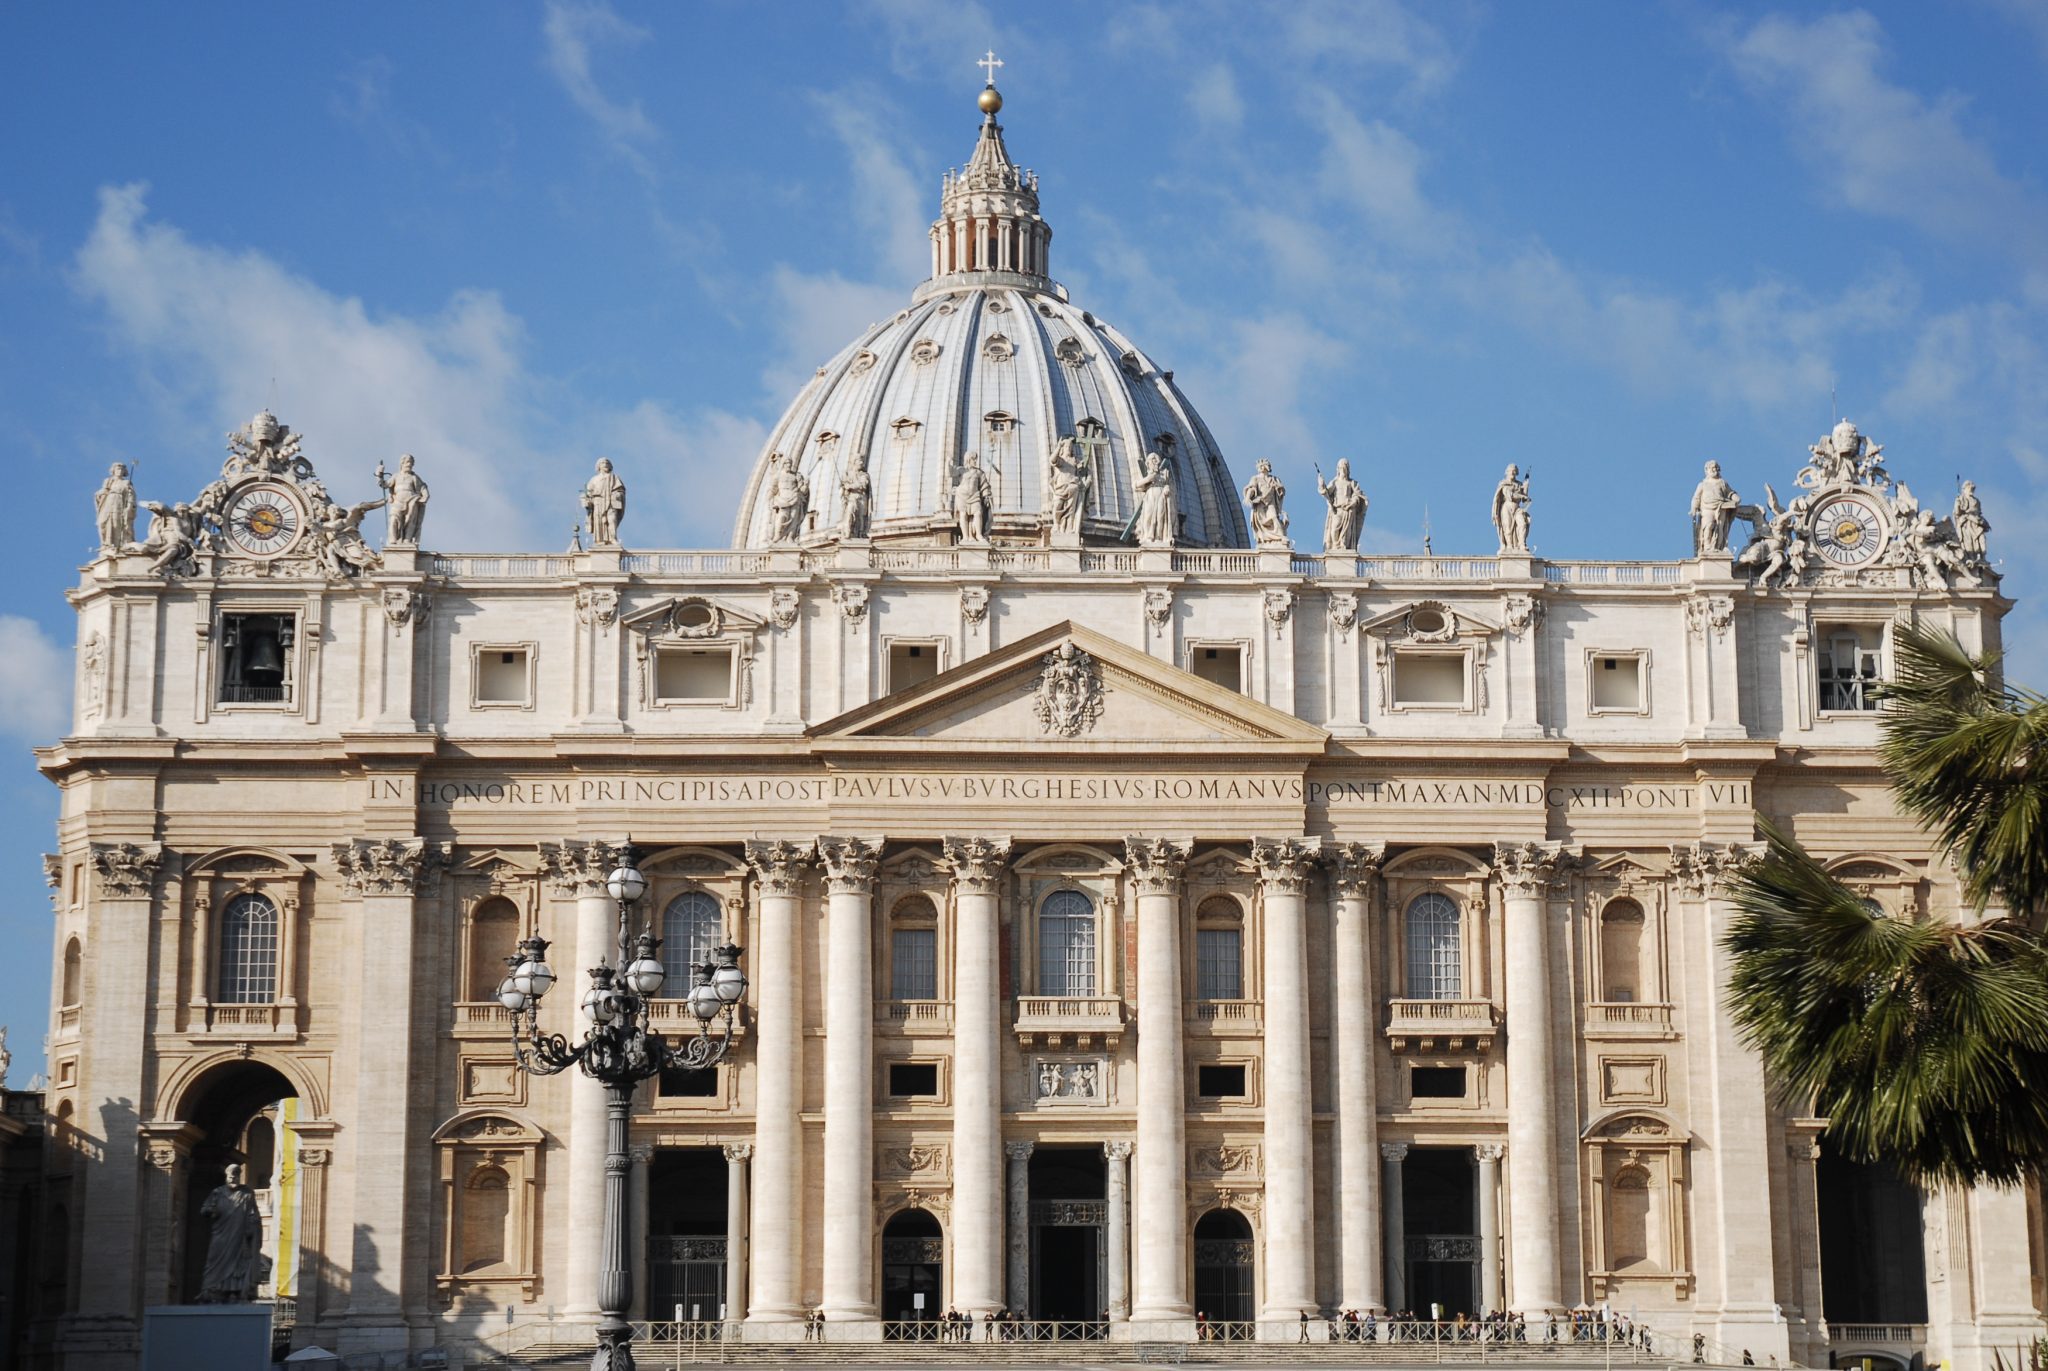 St._Peter's_Basilica_view_from_Saint_Peter's_Square,_Vatican_City,_Rome,_Italy